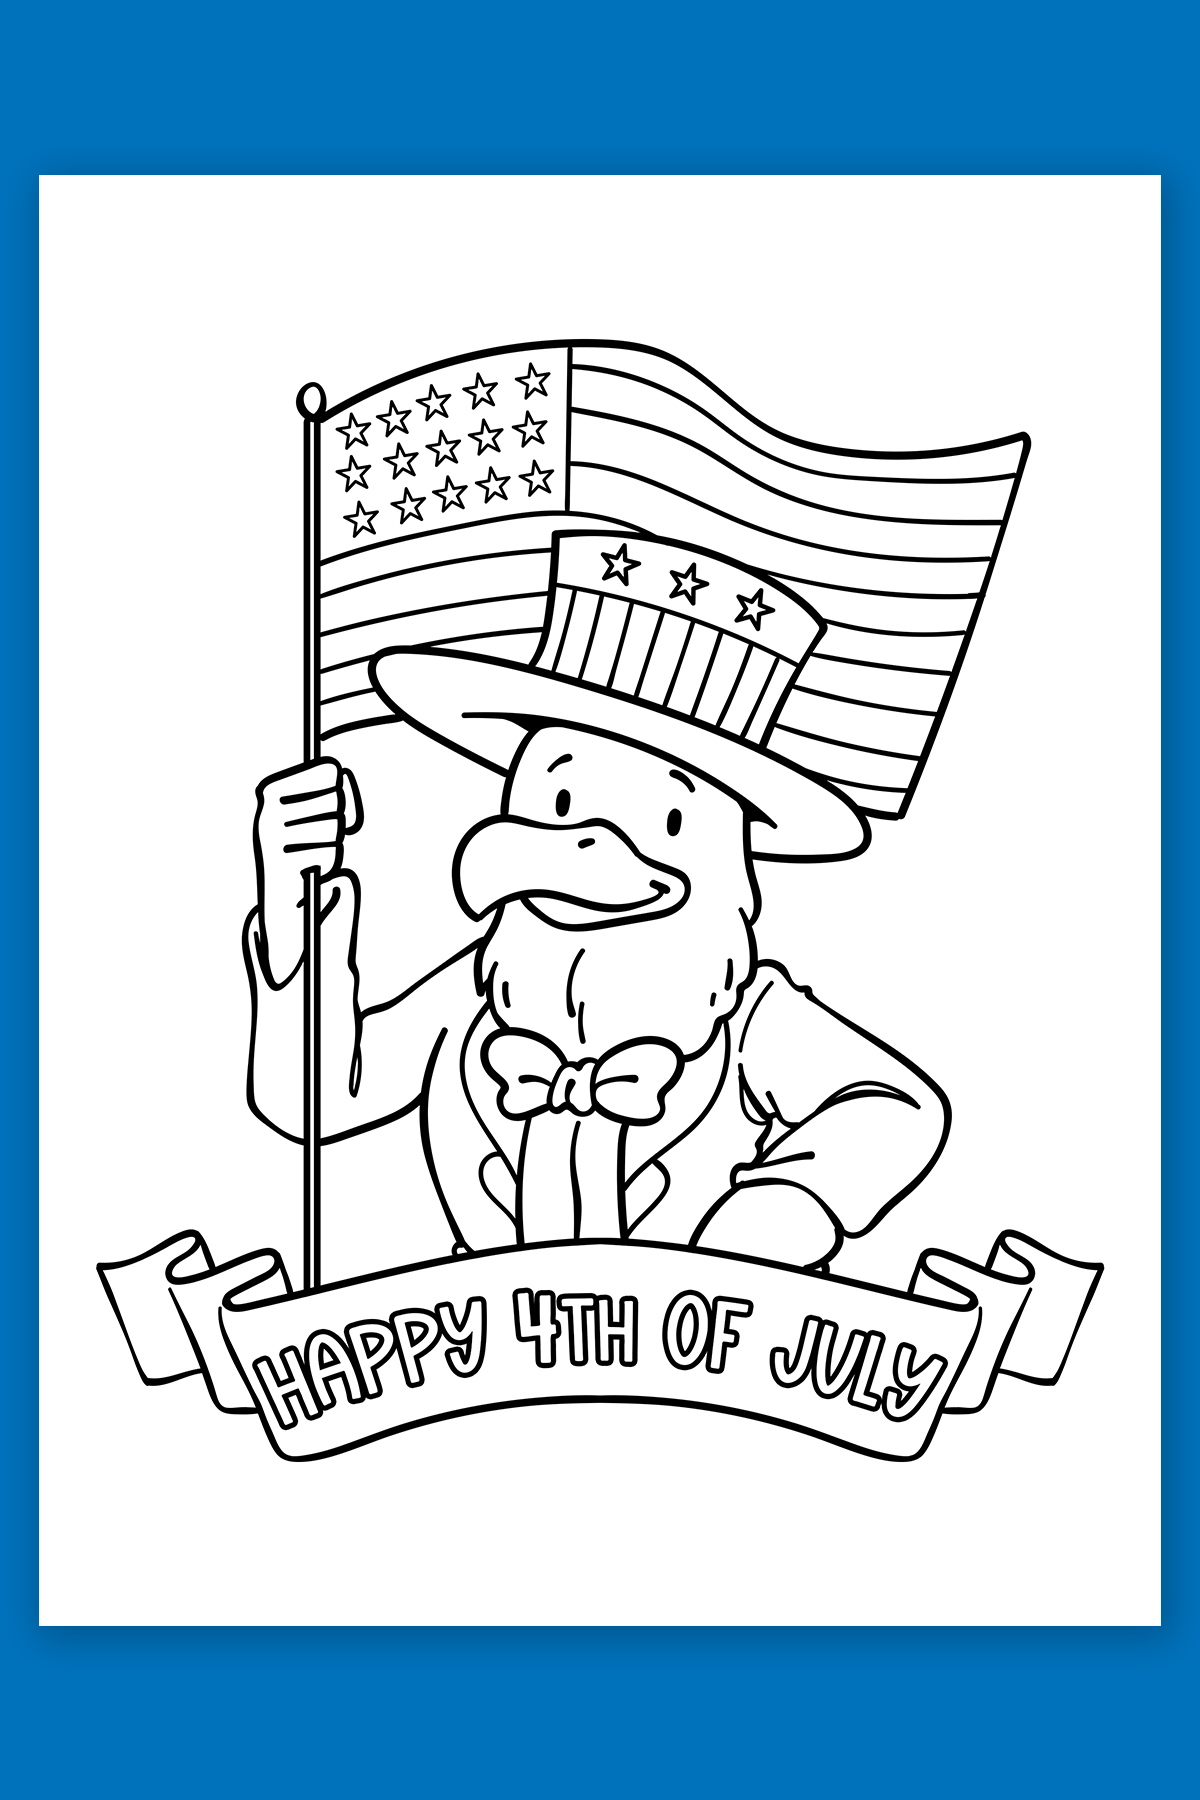 This free 4th of July coloring page says Happy 4th of July on a banner with a cartoon bald eagle wearing a suit and patriotic hat carrying an American flag.